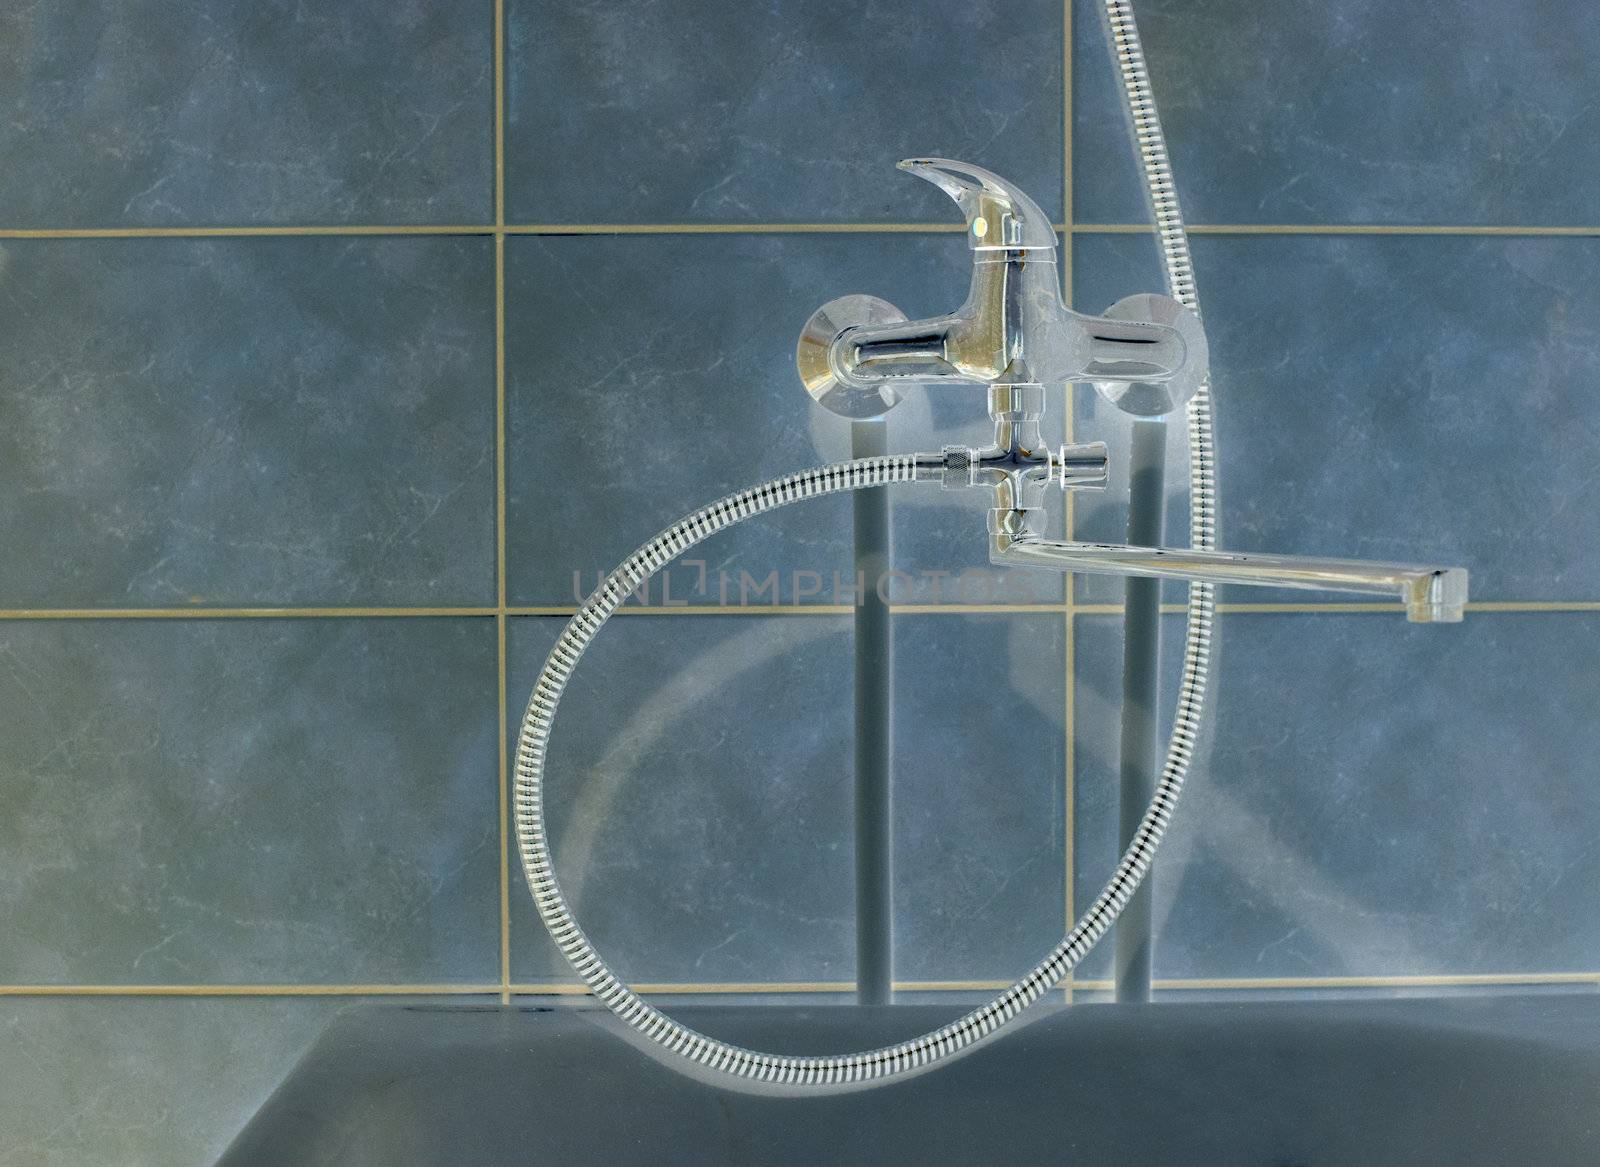 Shaded crome shower faucet turned to right by vetdoctor